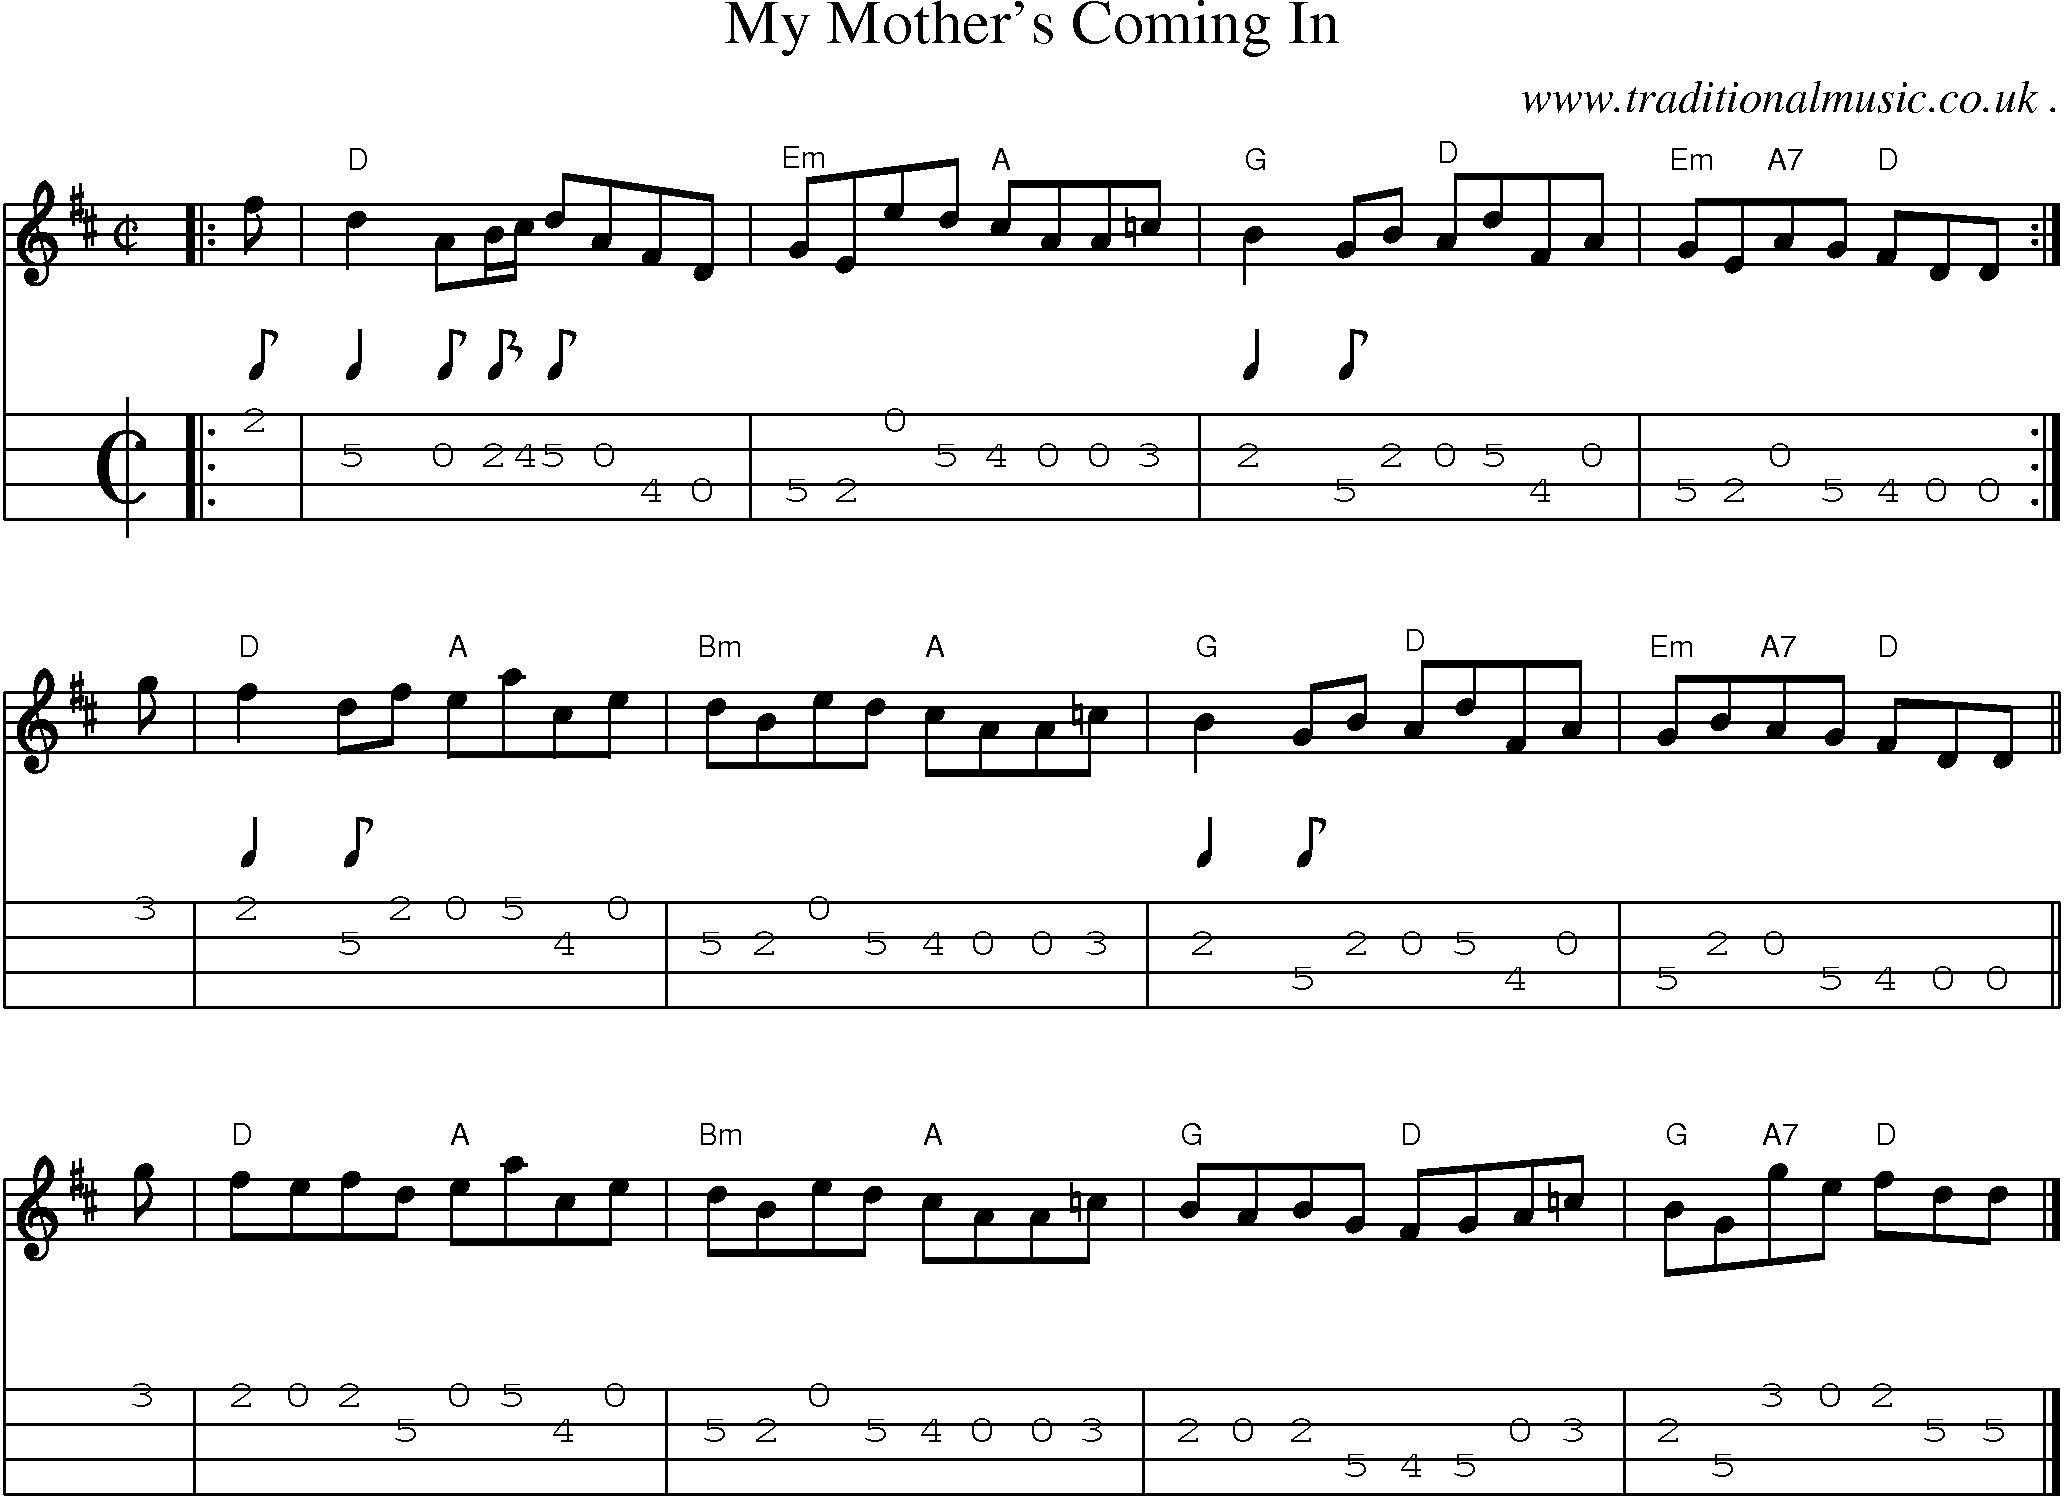 Sheet-music  score, Chords and Mandolin Tabs for My Mothers Coming In